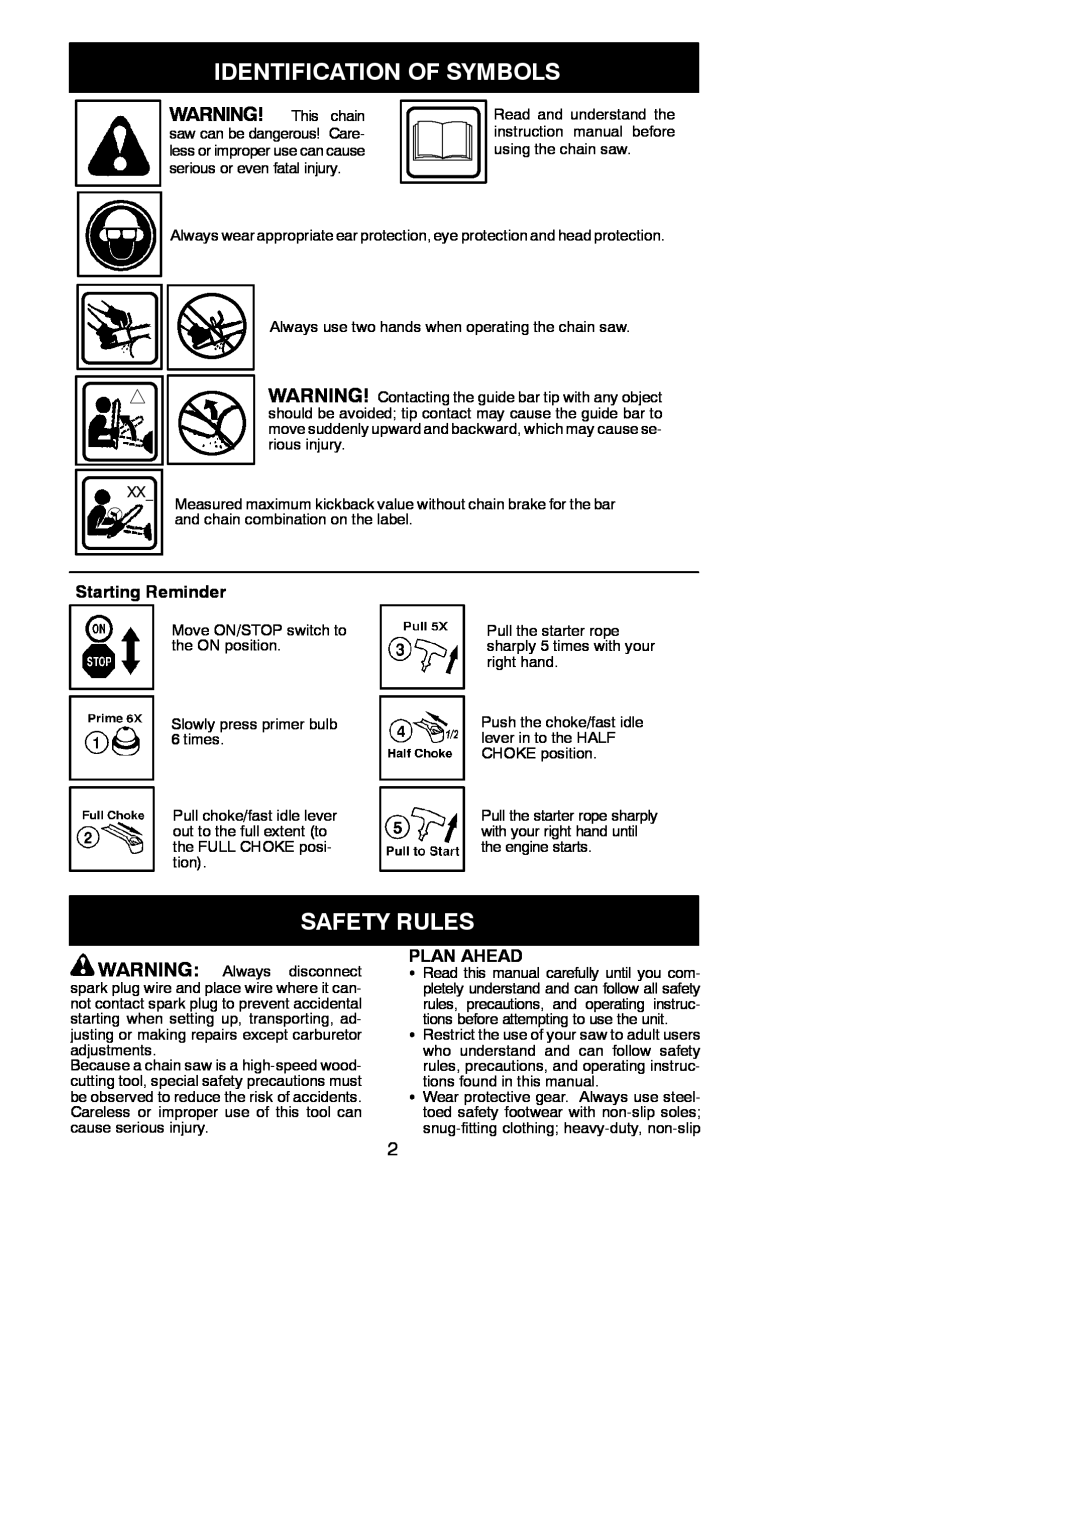 Poulan 530165399 instruction manual Identification Of Symbols, Safety Rules, Starting Reminder, Plan Ahead 